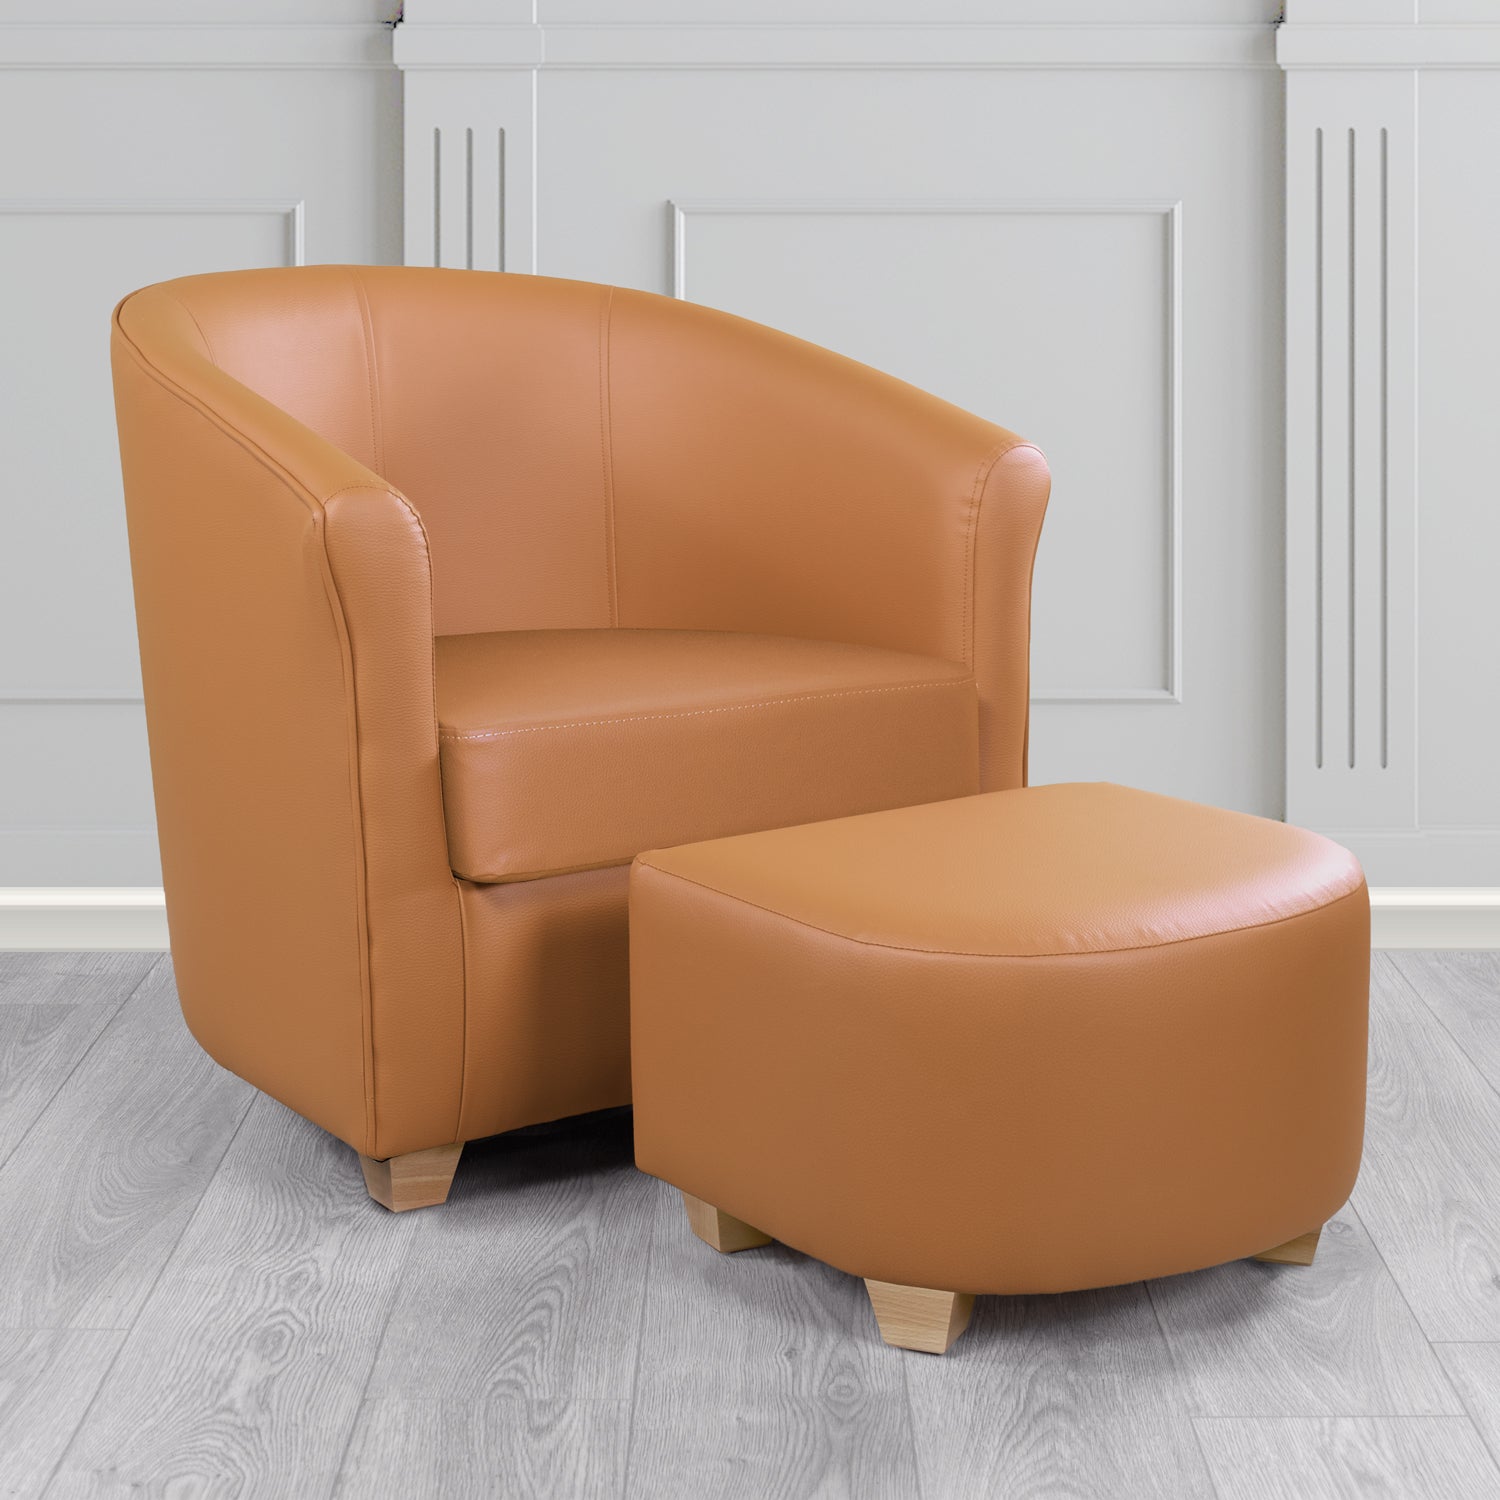 Cannes Tub Chair with Footstool Set in Just Colour Fudge Crib 5 Faux Leather - The Tub Chair Shop